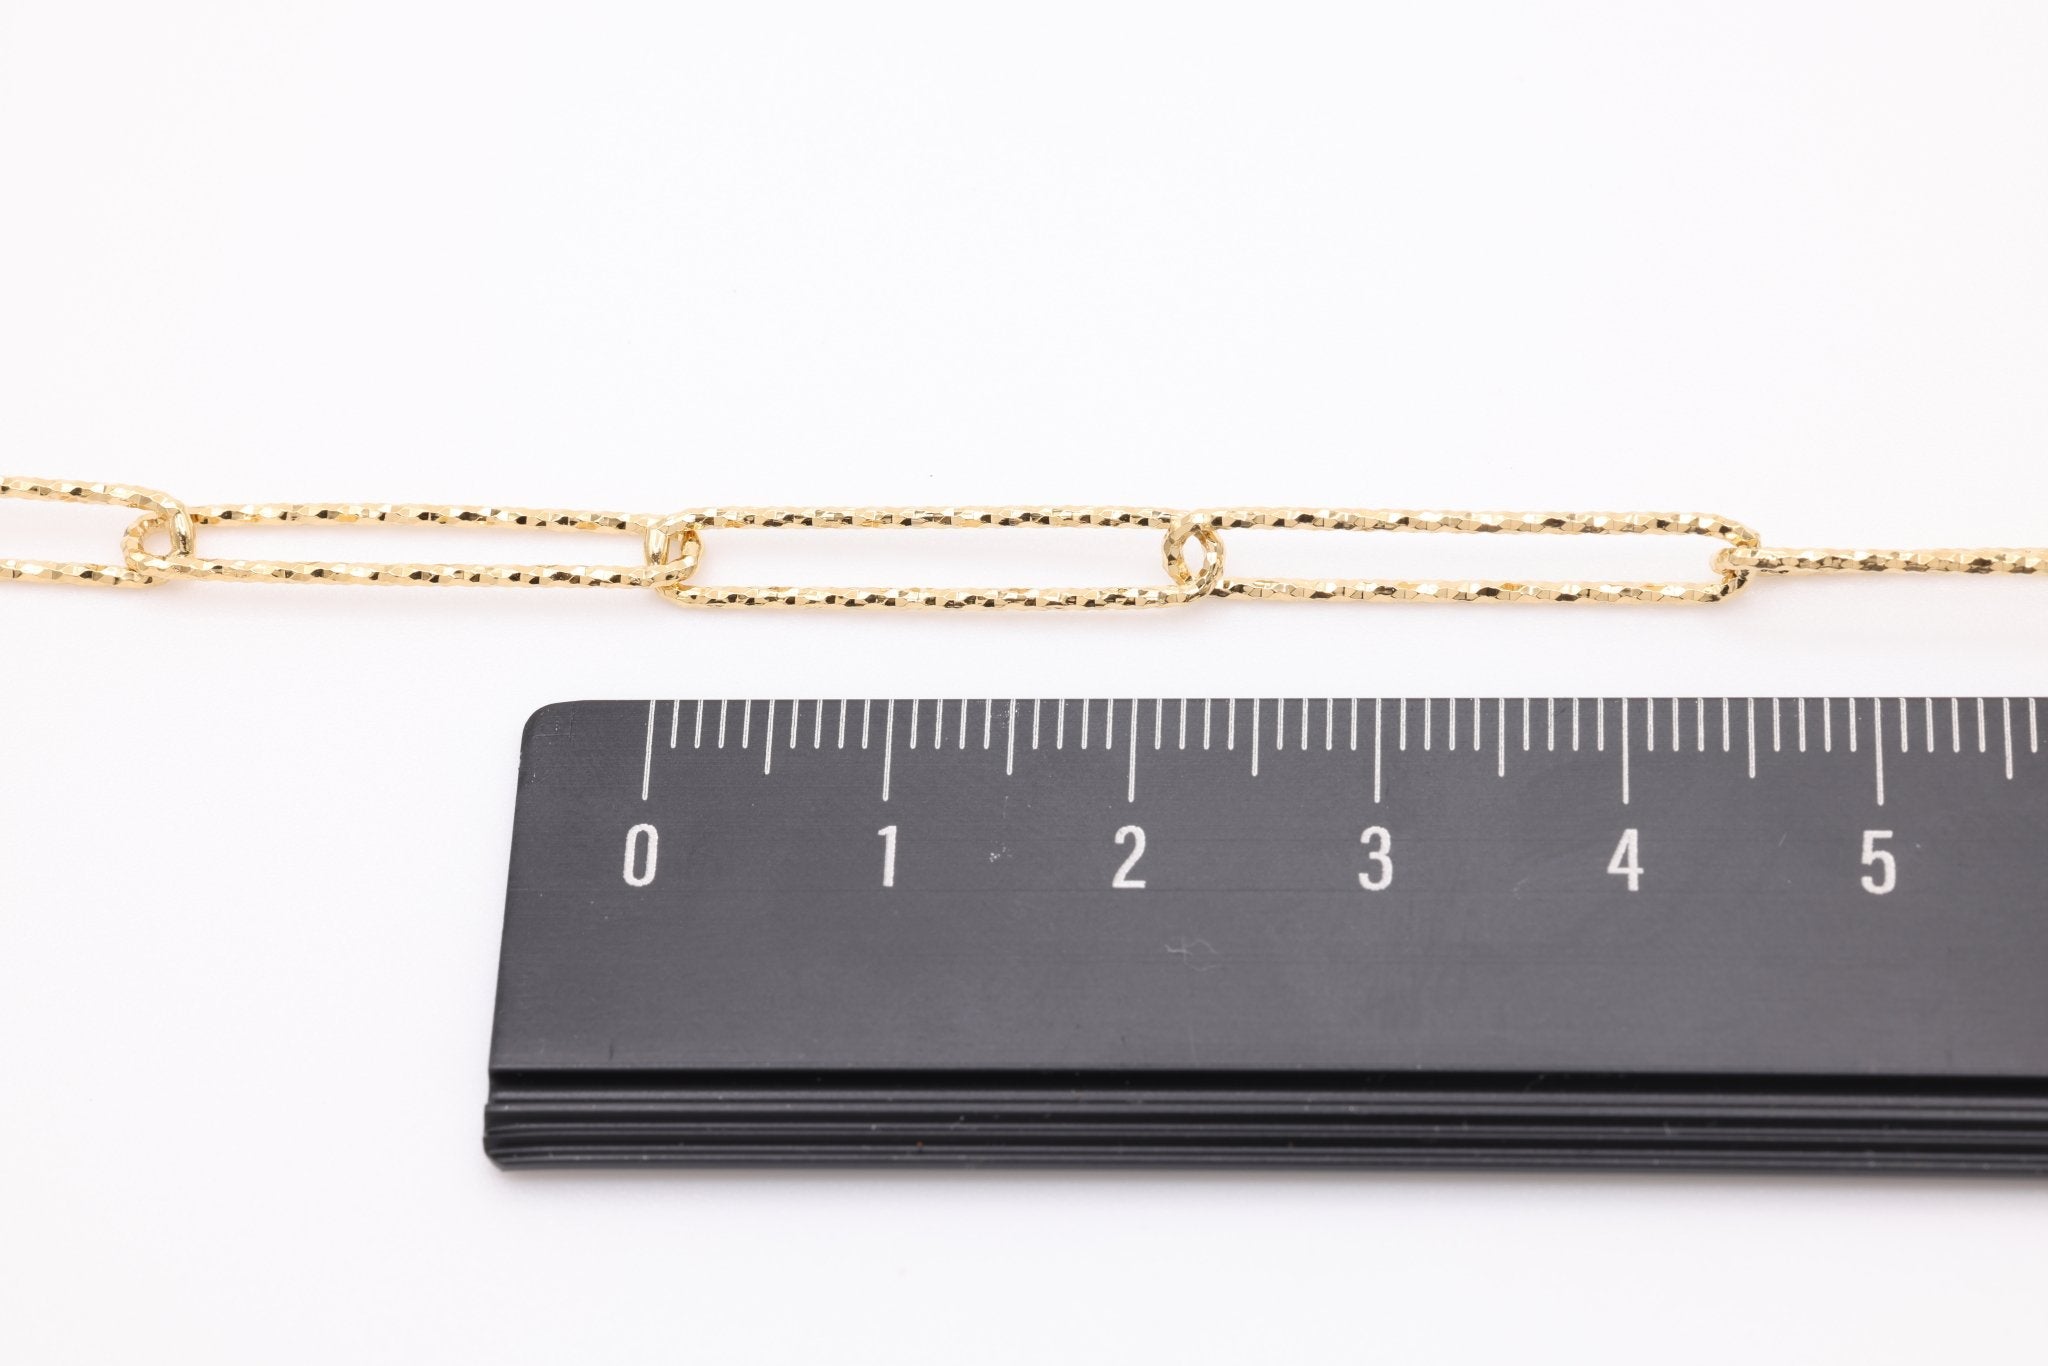 24mm Amelia Elongated Diamond Cut Cable Chain, 14K Gold Overlay Plated, Wholesale Jewelry Chain - HarperCrown